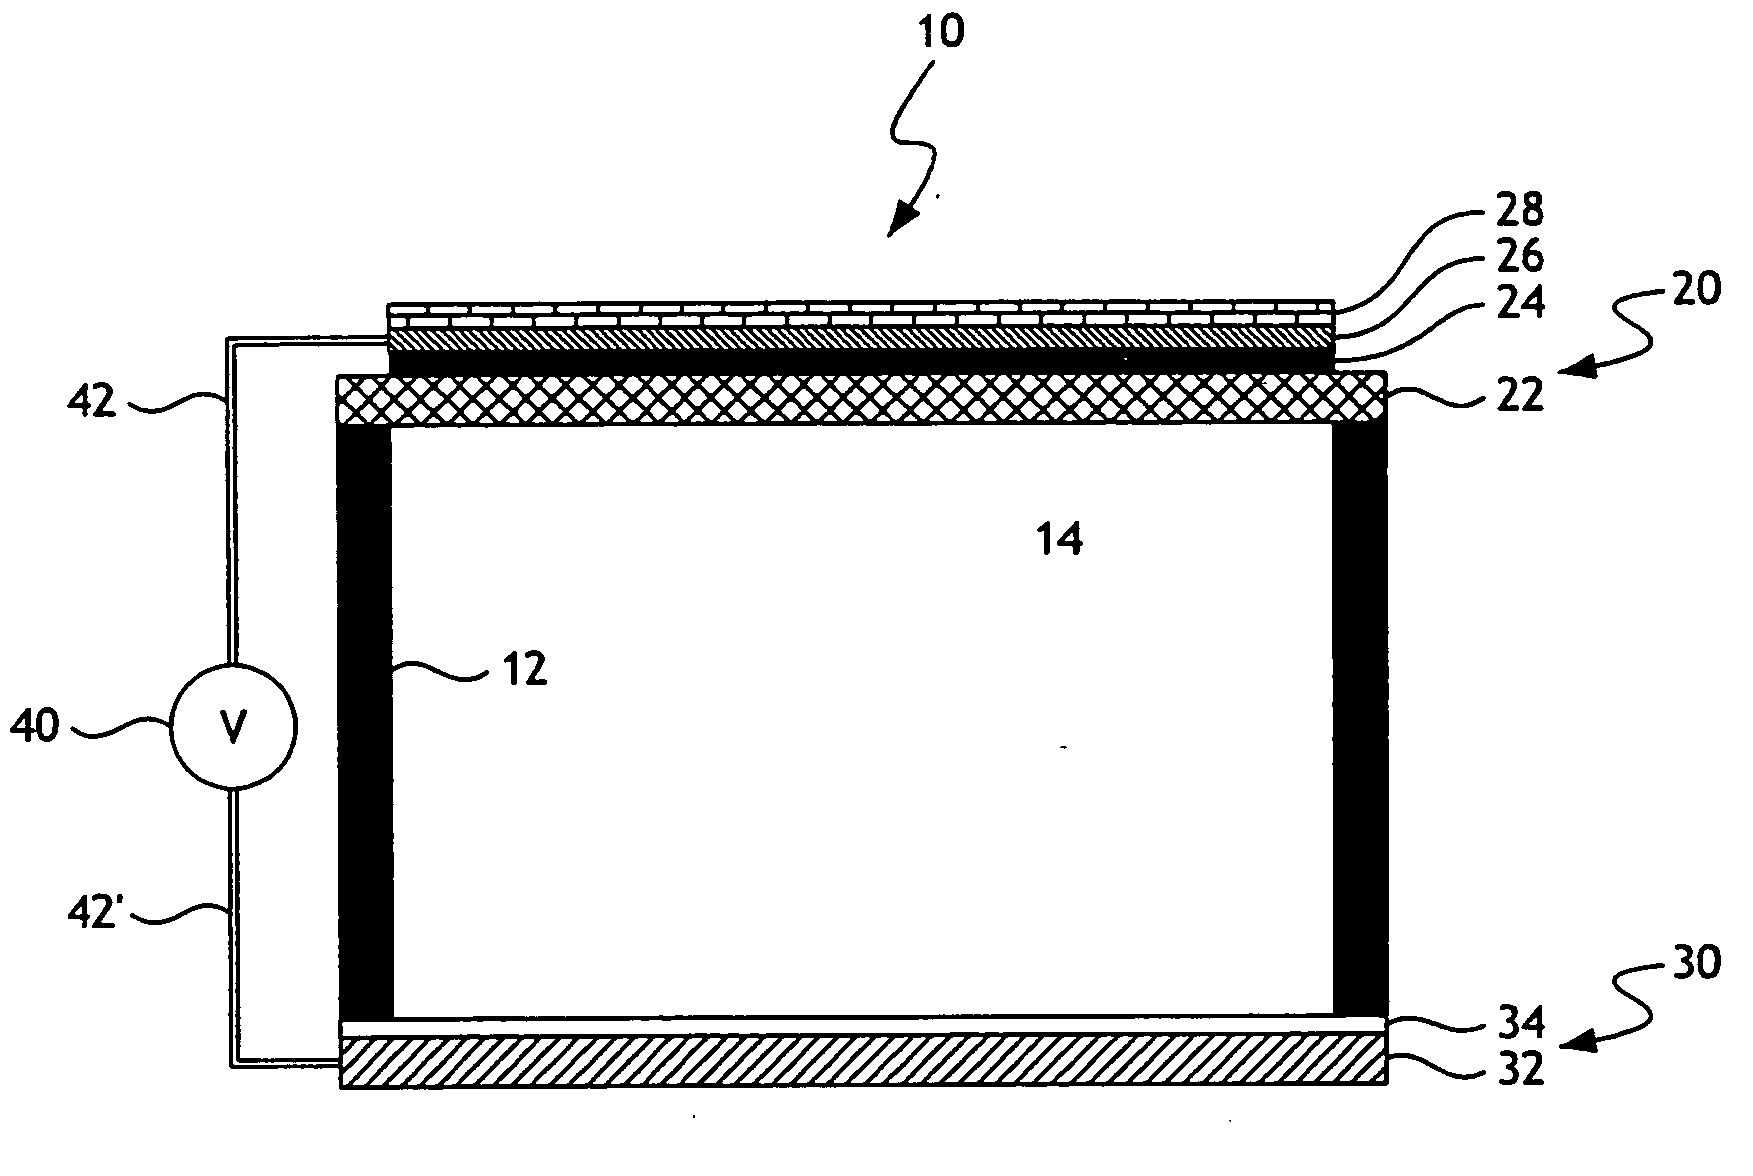 Dielectric barrier discharge plasma reactor cell